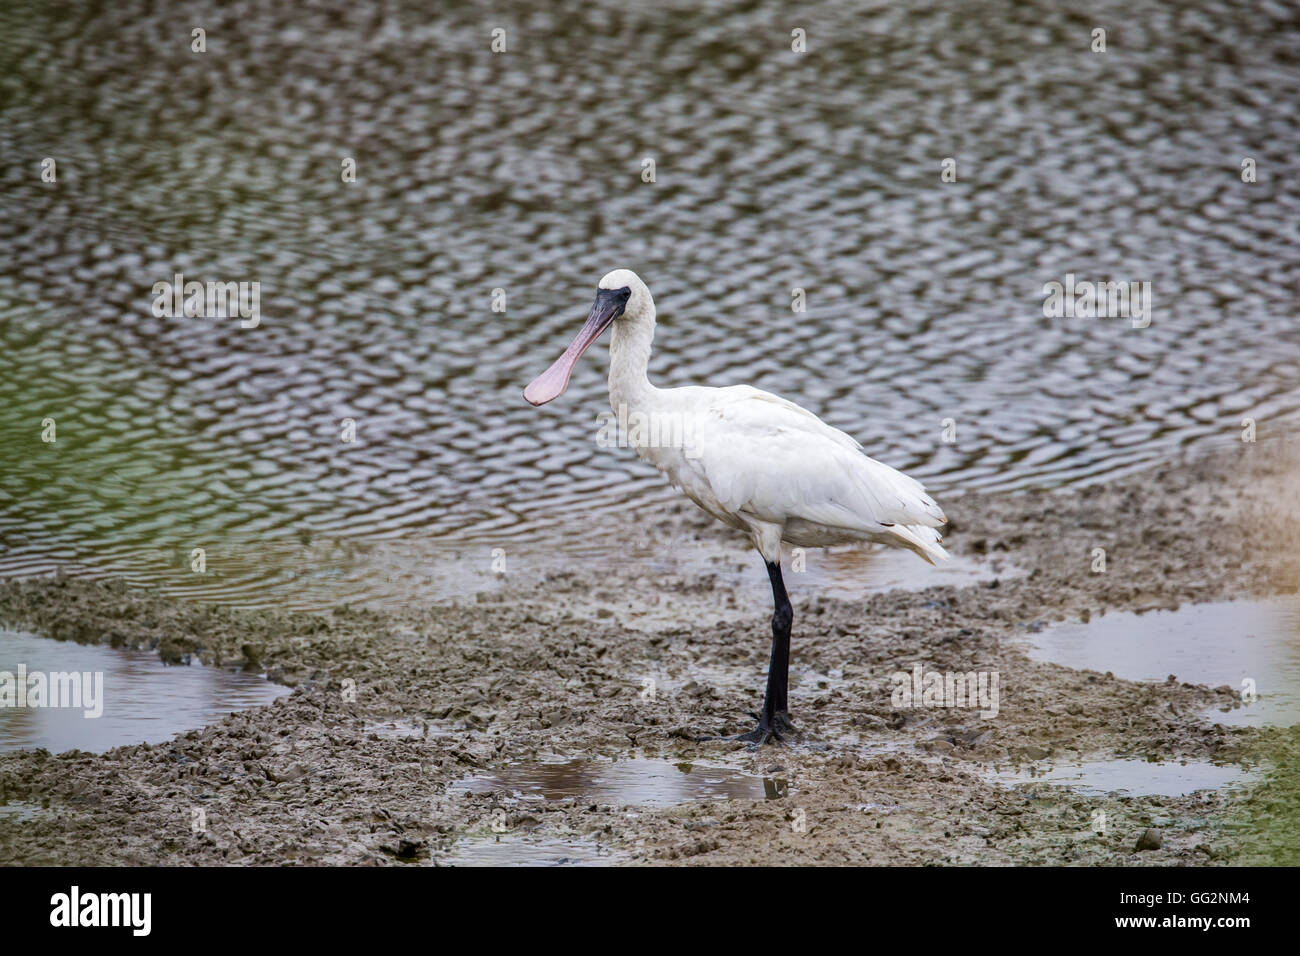 Black-faced Spoonbill looking for food in water Stock Photo